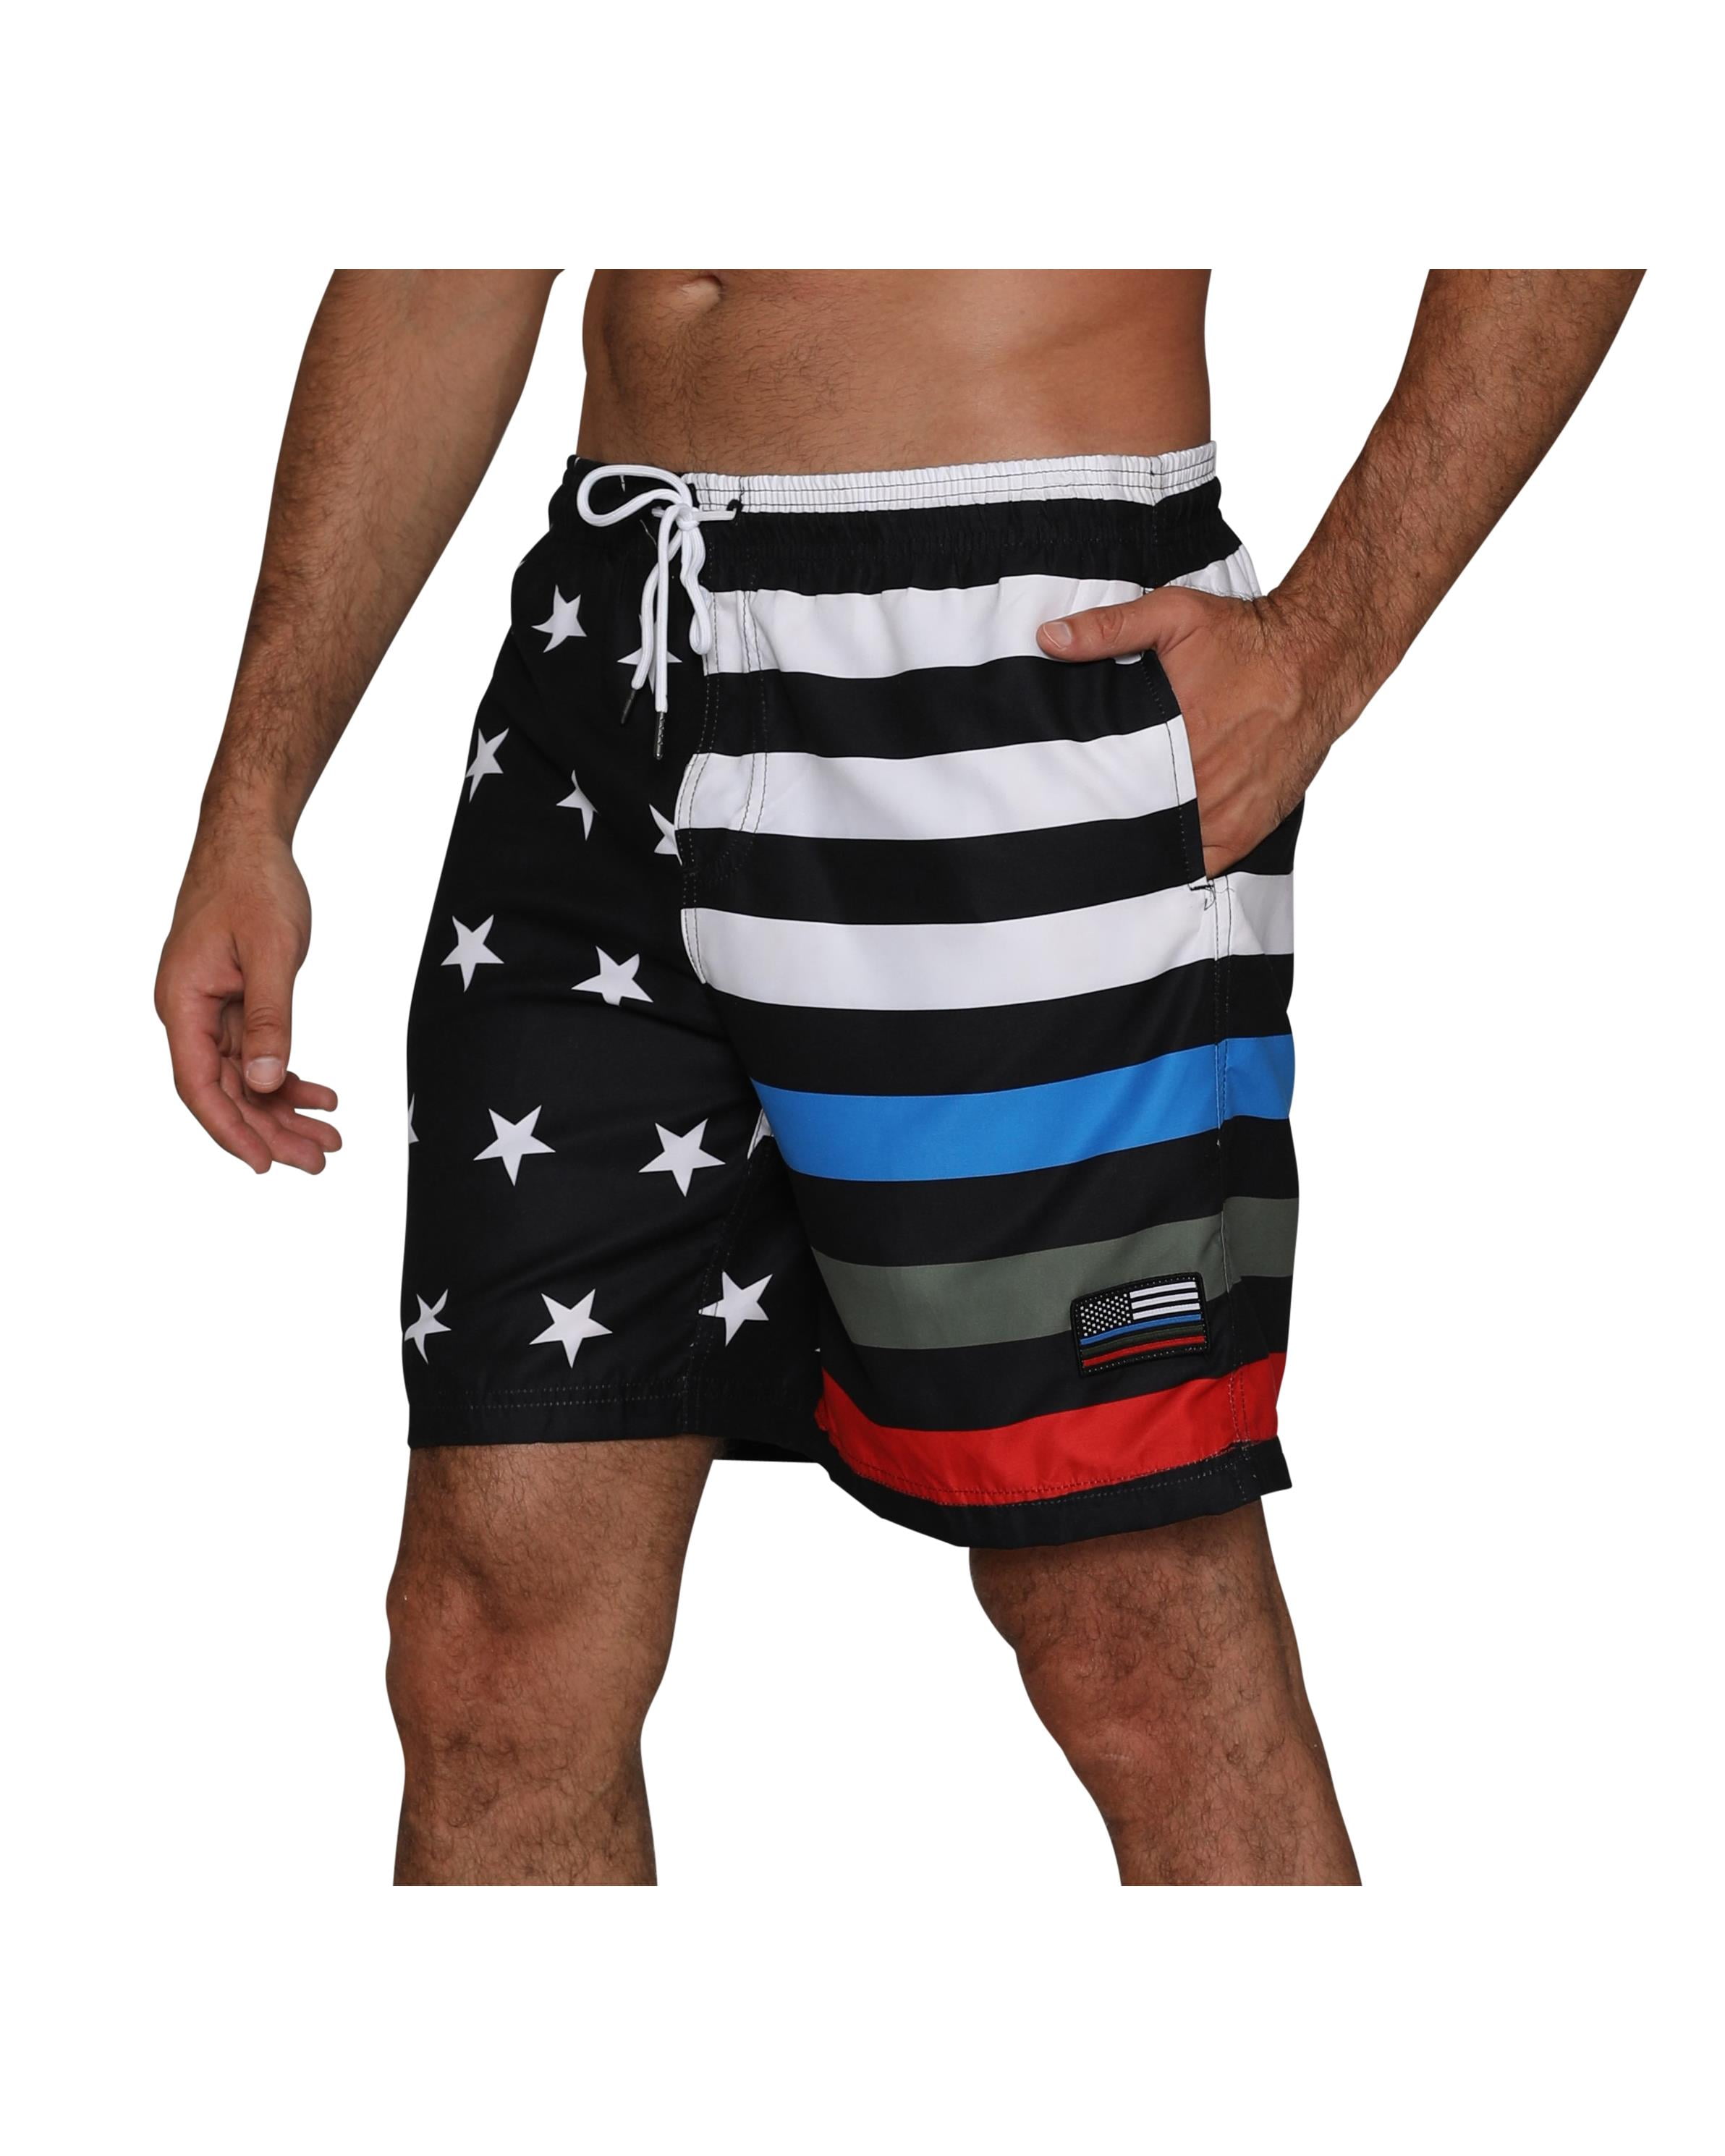 Mens Wall Hole Yellow Black Stripes Quick Drying Breathable Surf Pants Swim Trunks